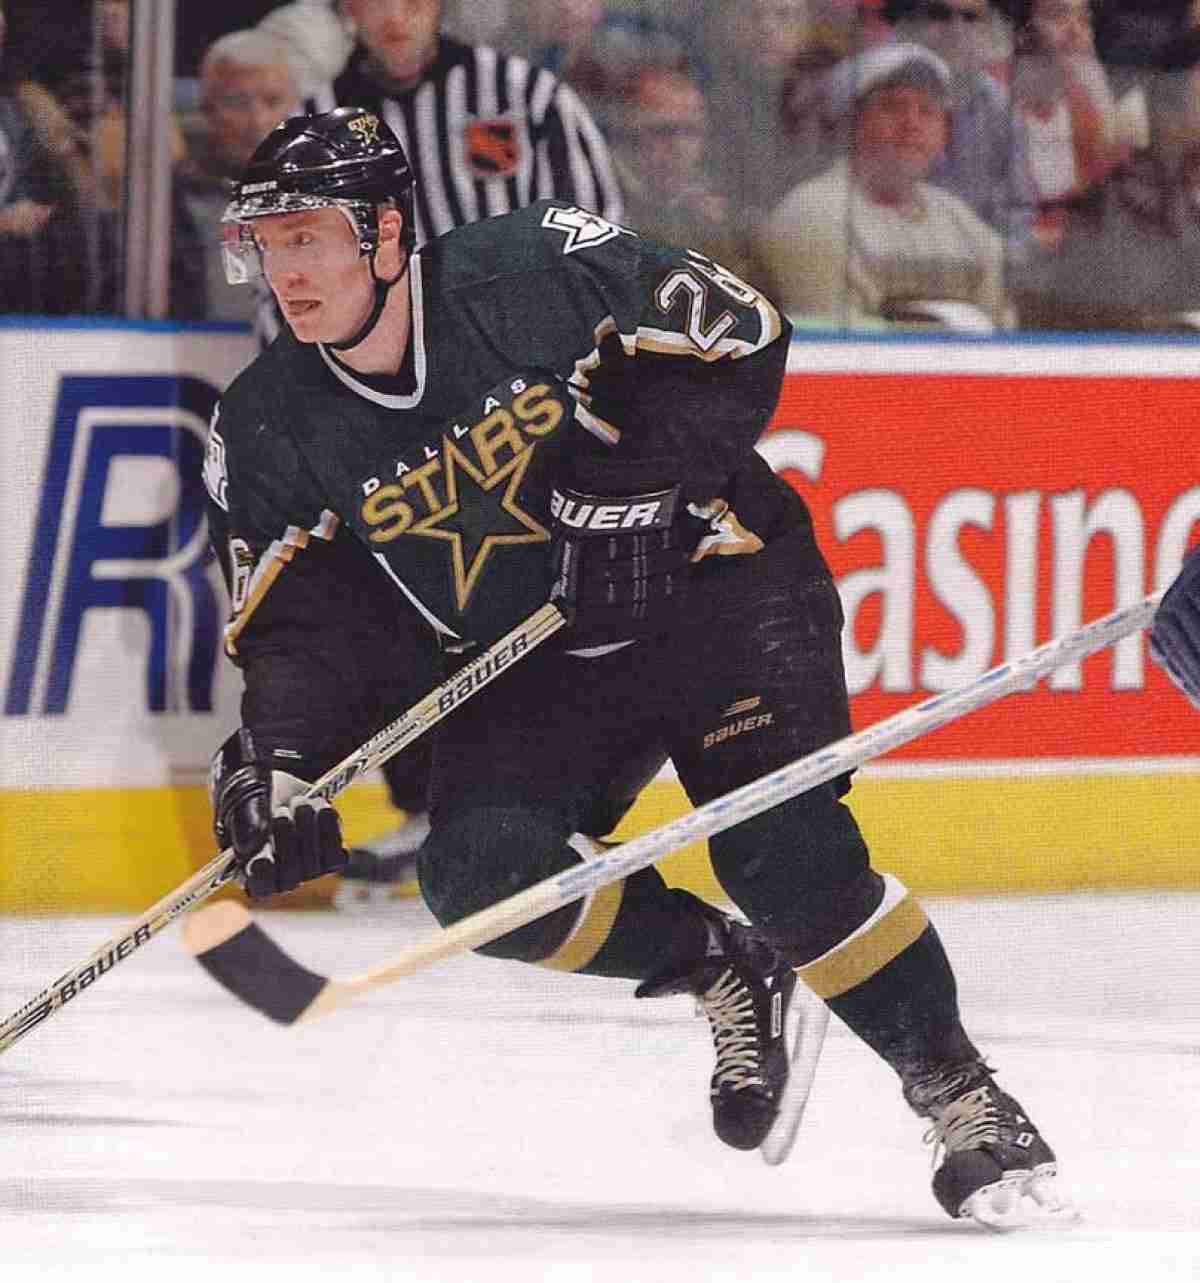 Jere Lehtinen's number retired in Finland. Should Dallas be next